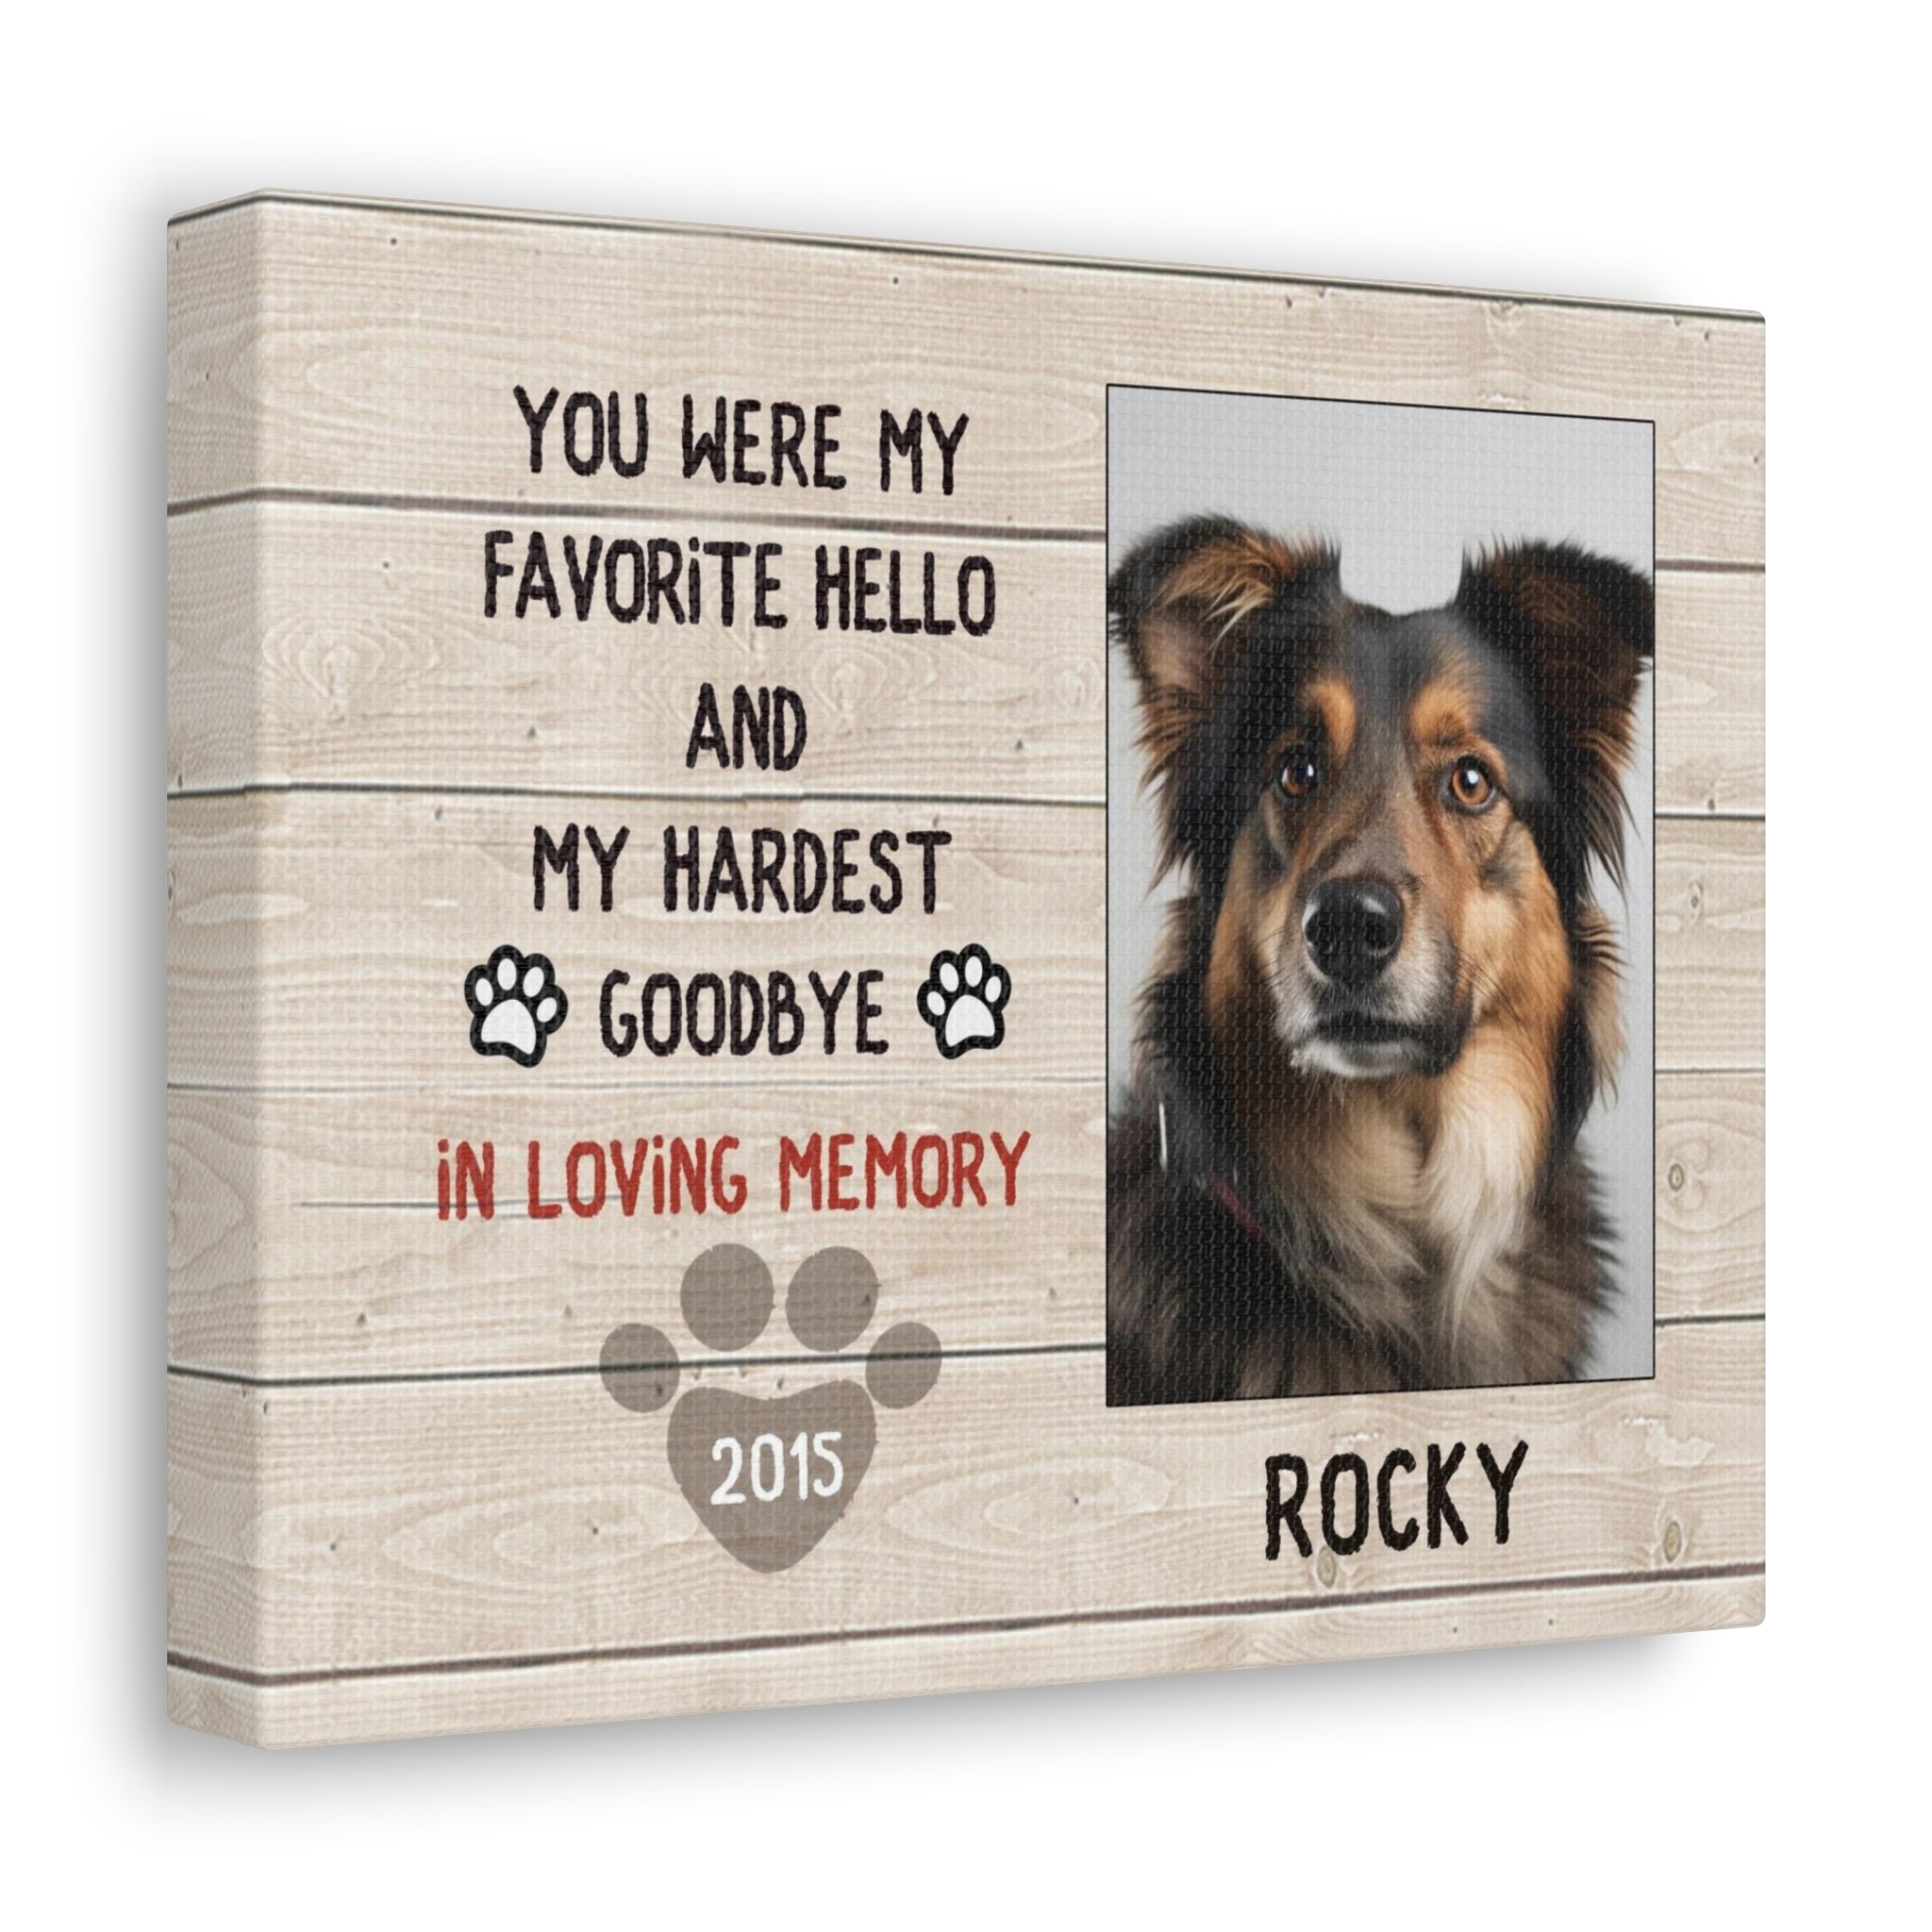 My Hardest Goodbye - Personalized Canvas Print Pet Memorial